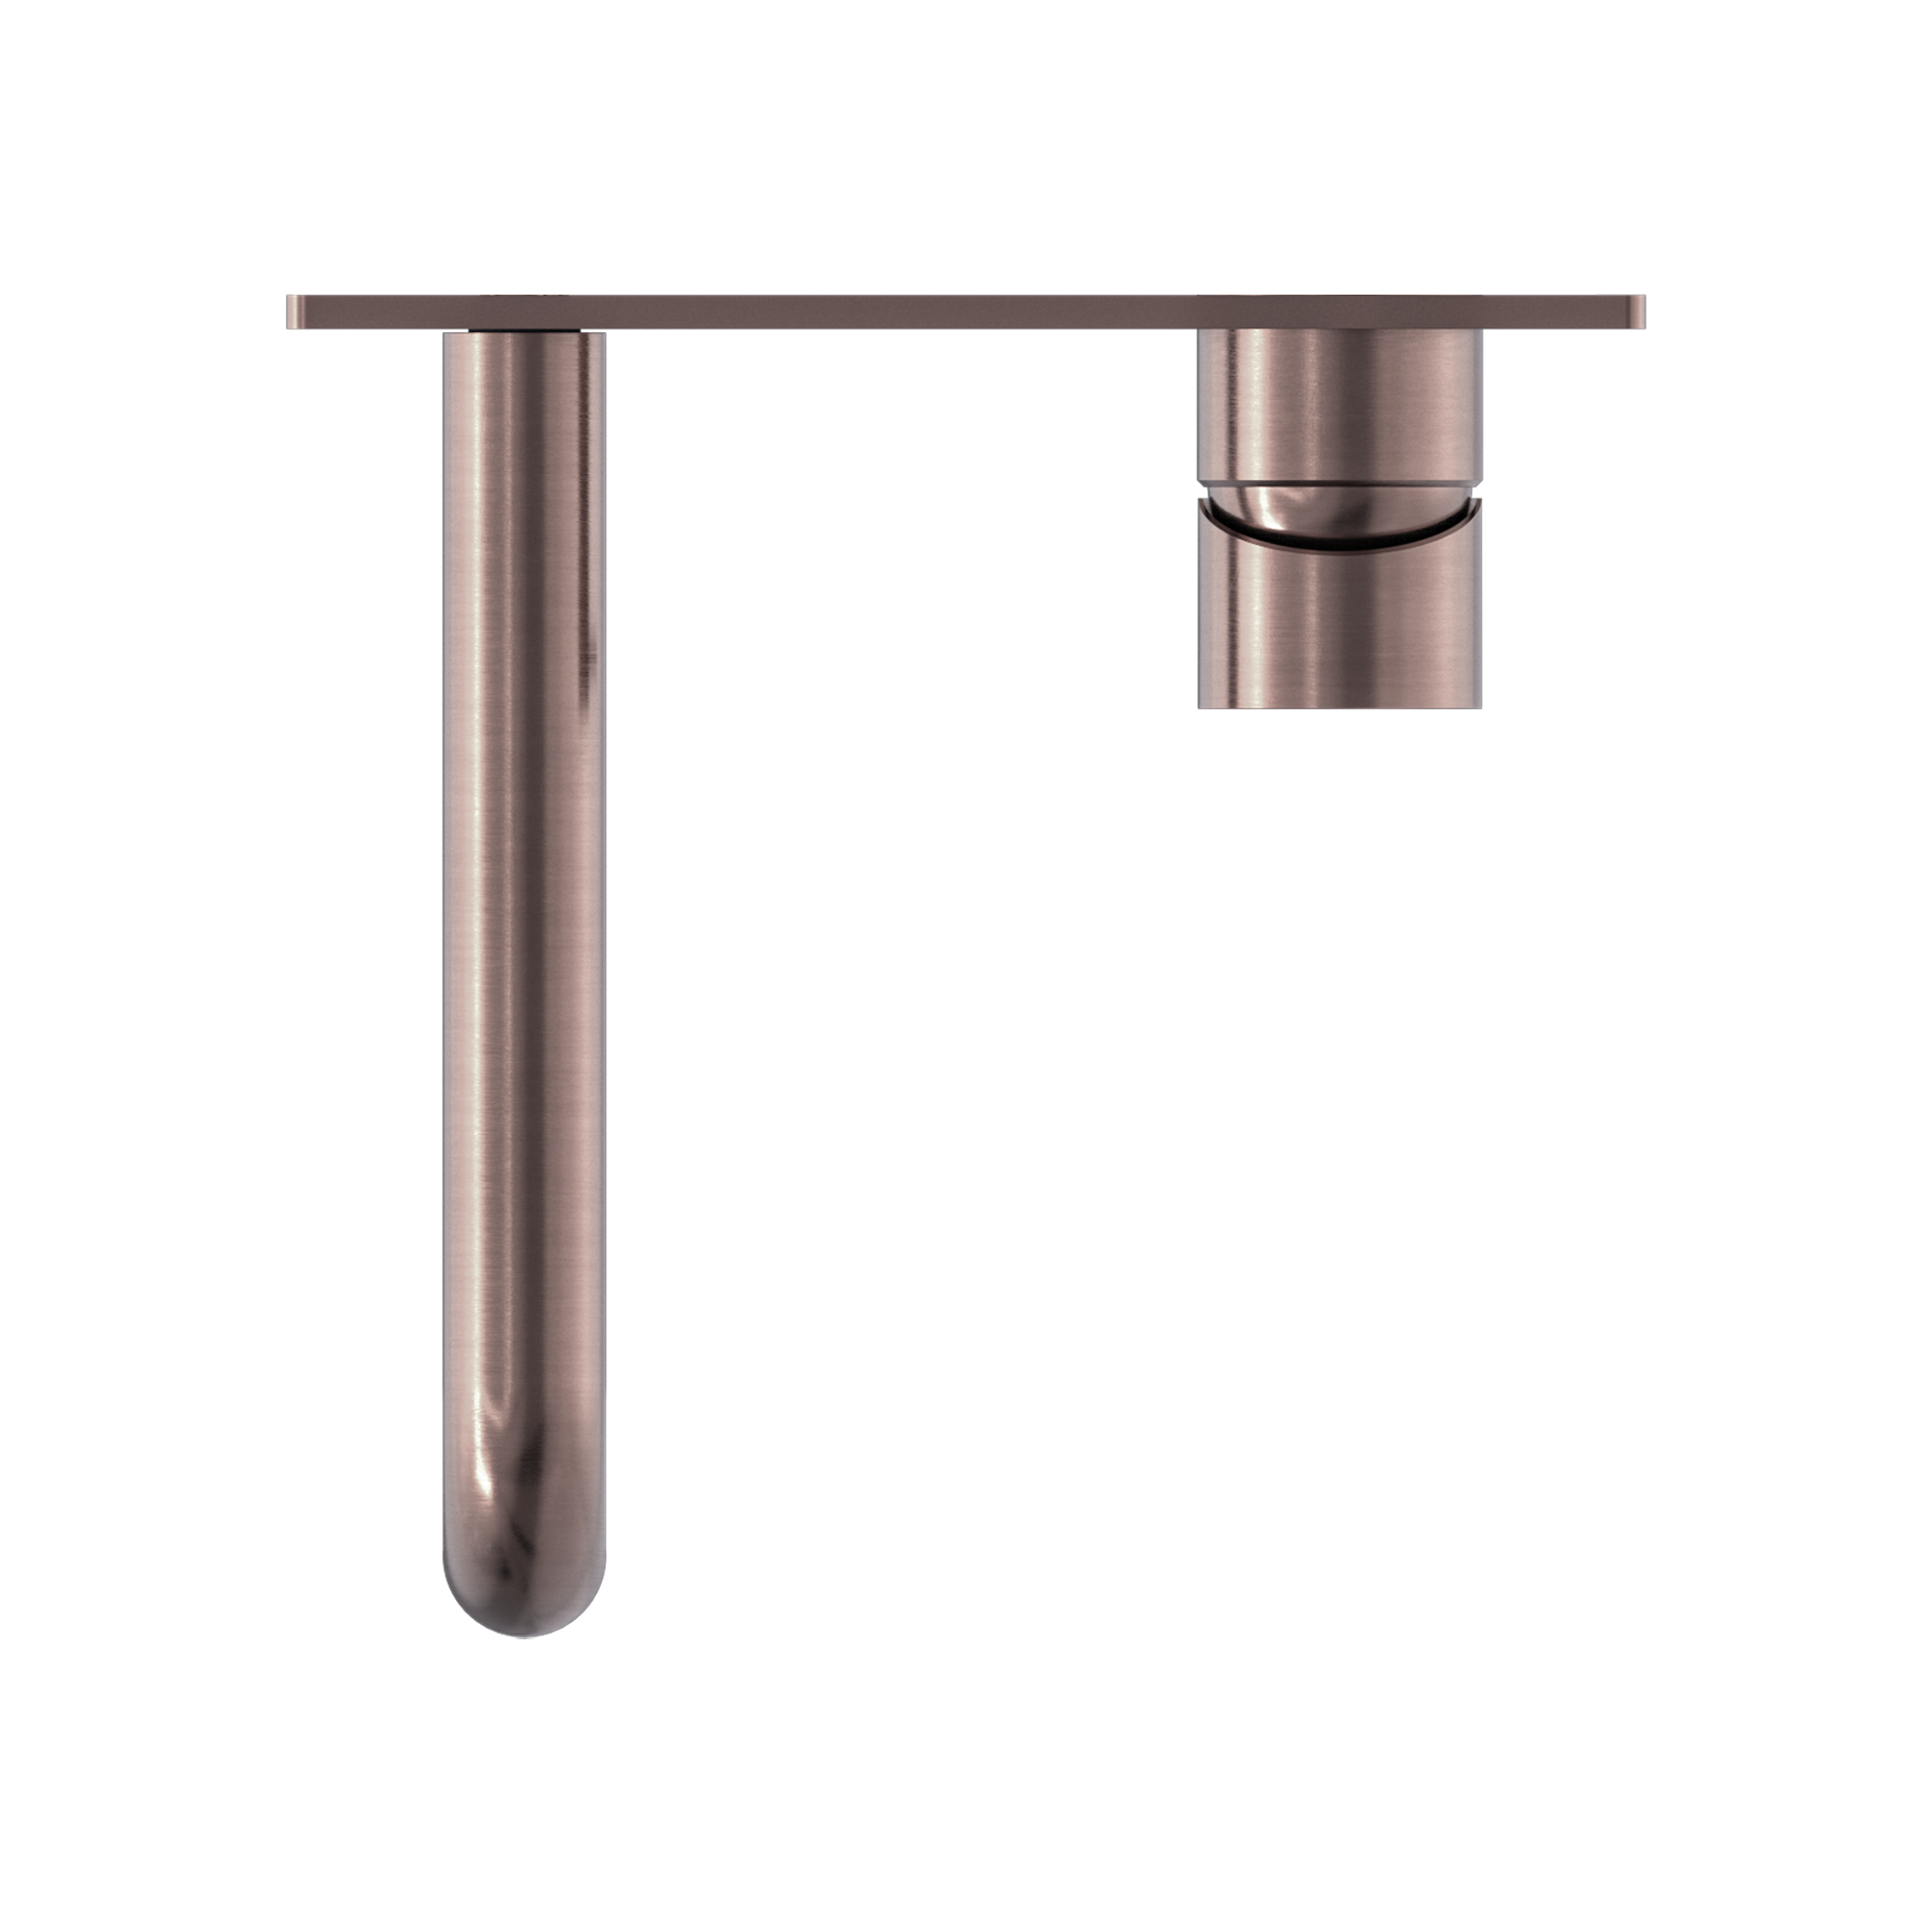 NERO MECCA WALL BASIN/ BATH MIXER BRUSHED BRONZE (AVAILABLE IN 120MM,160MM,185MM, 230MM AND 260MM)